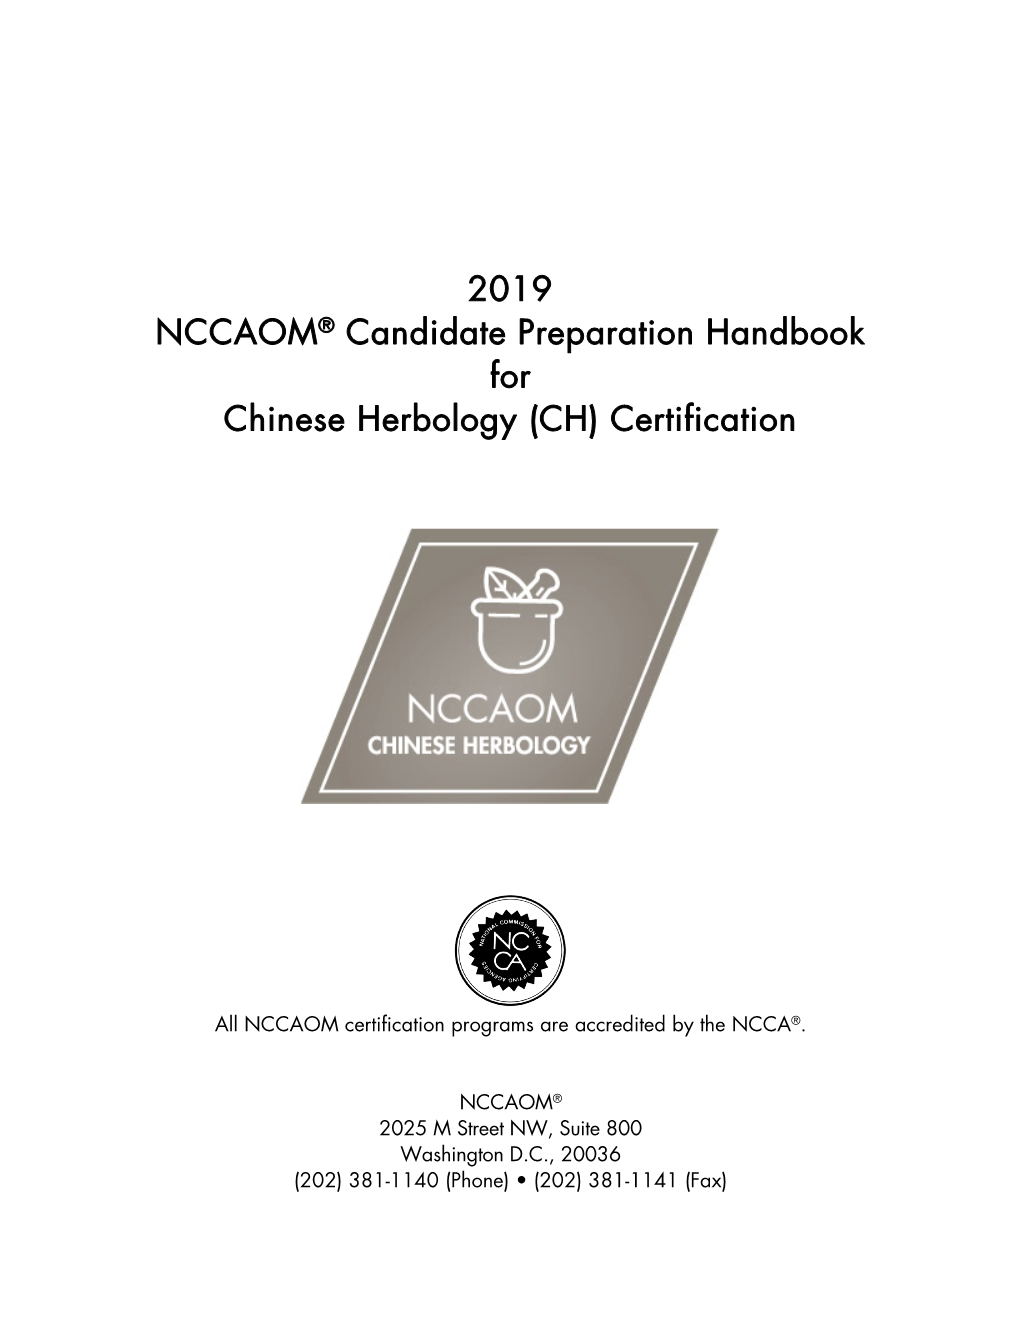 2019 NCCAOM® Candidate Preparation Handbook for Chinese Herbology (CH) Certification